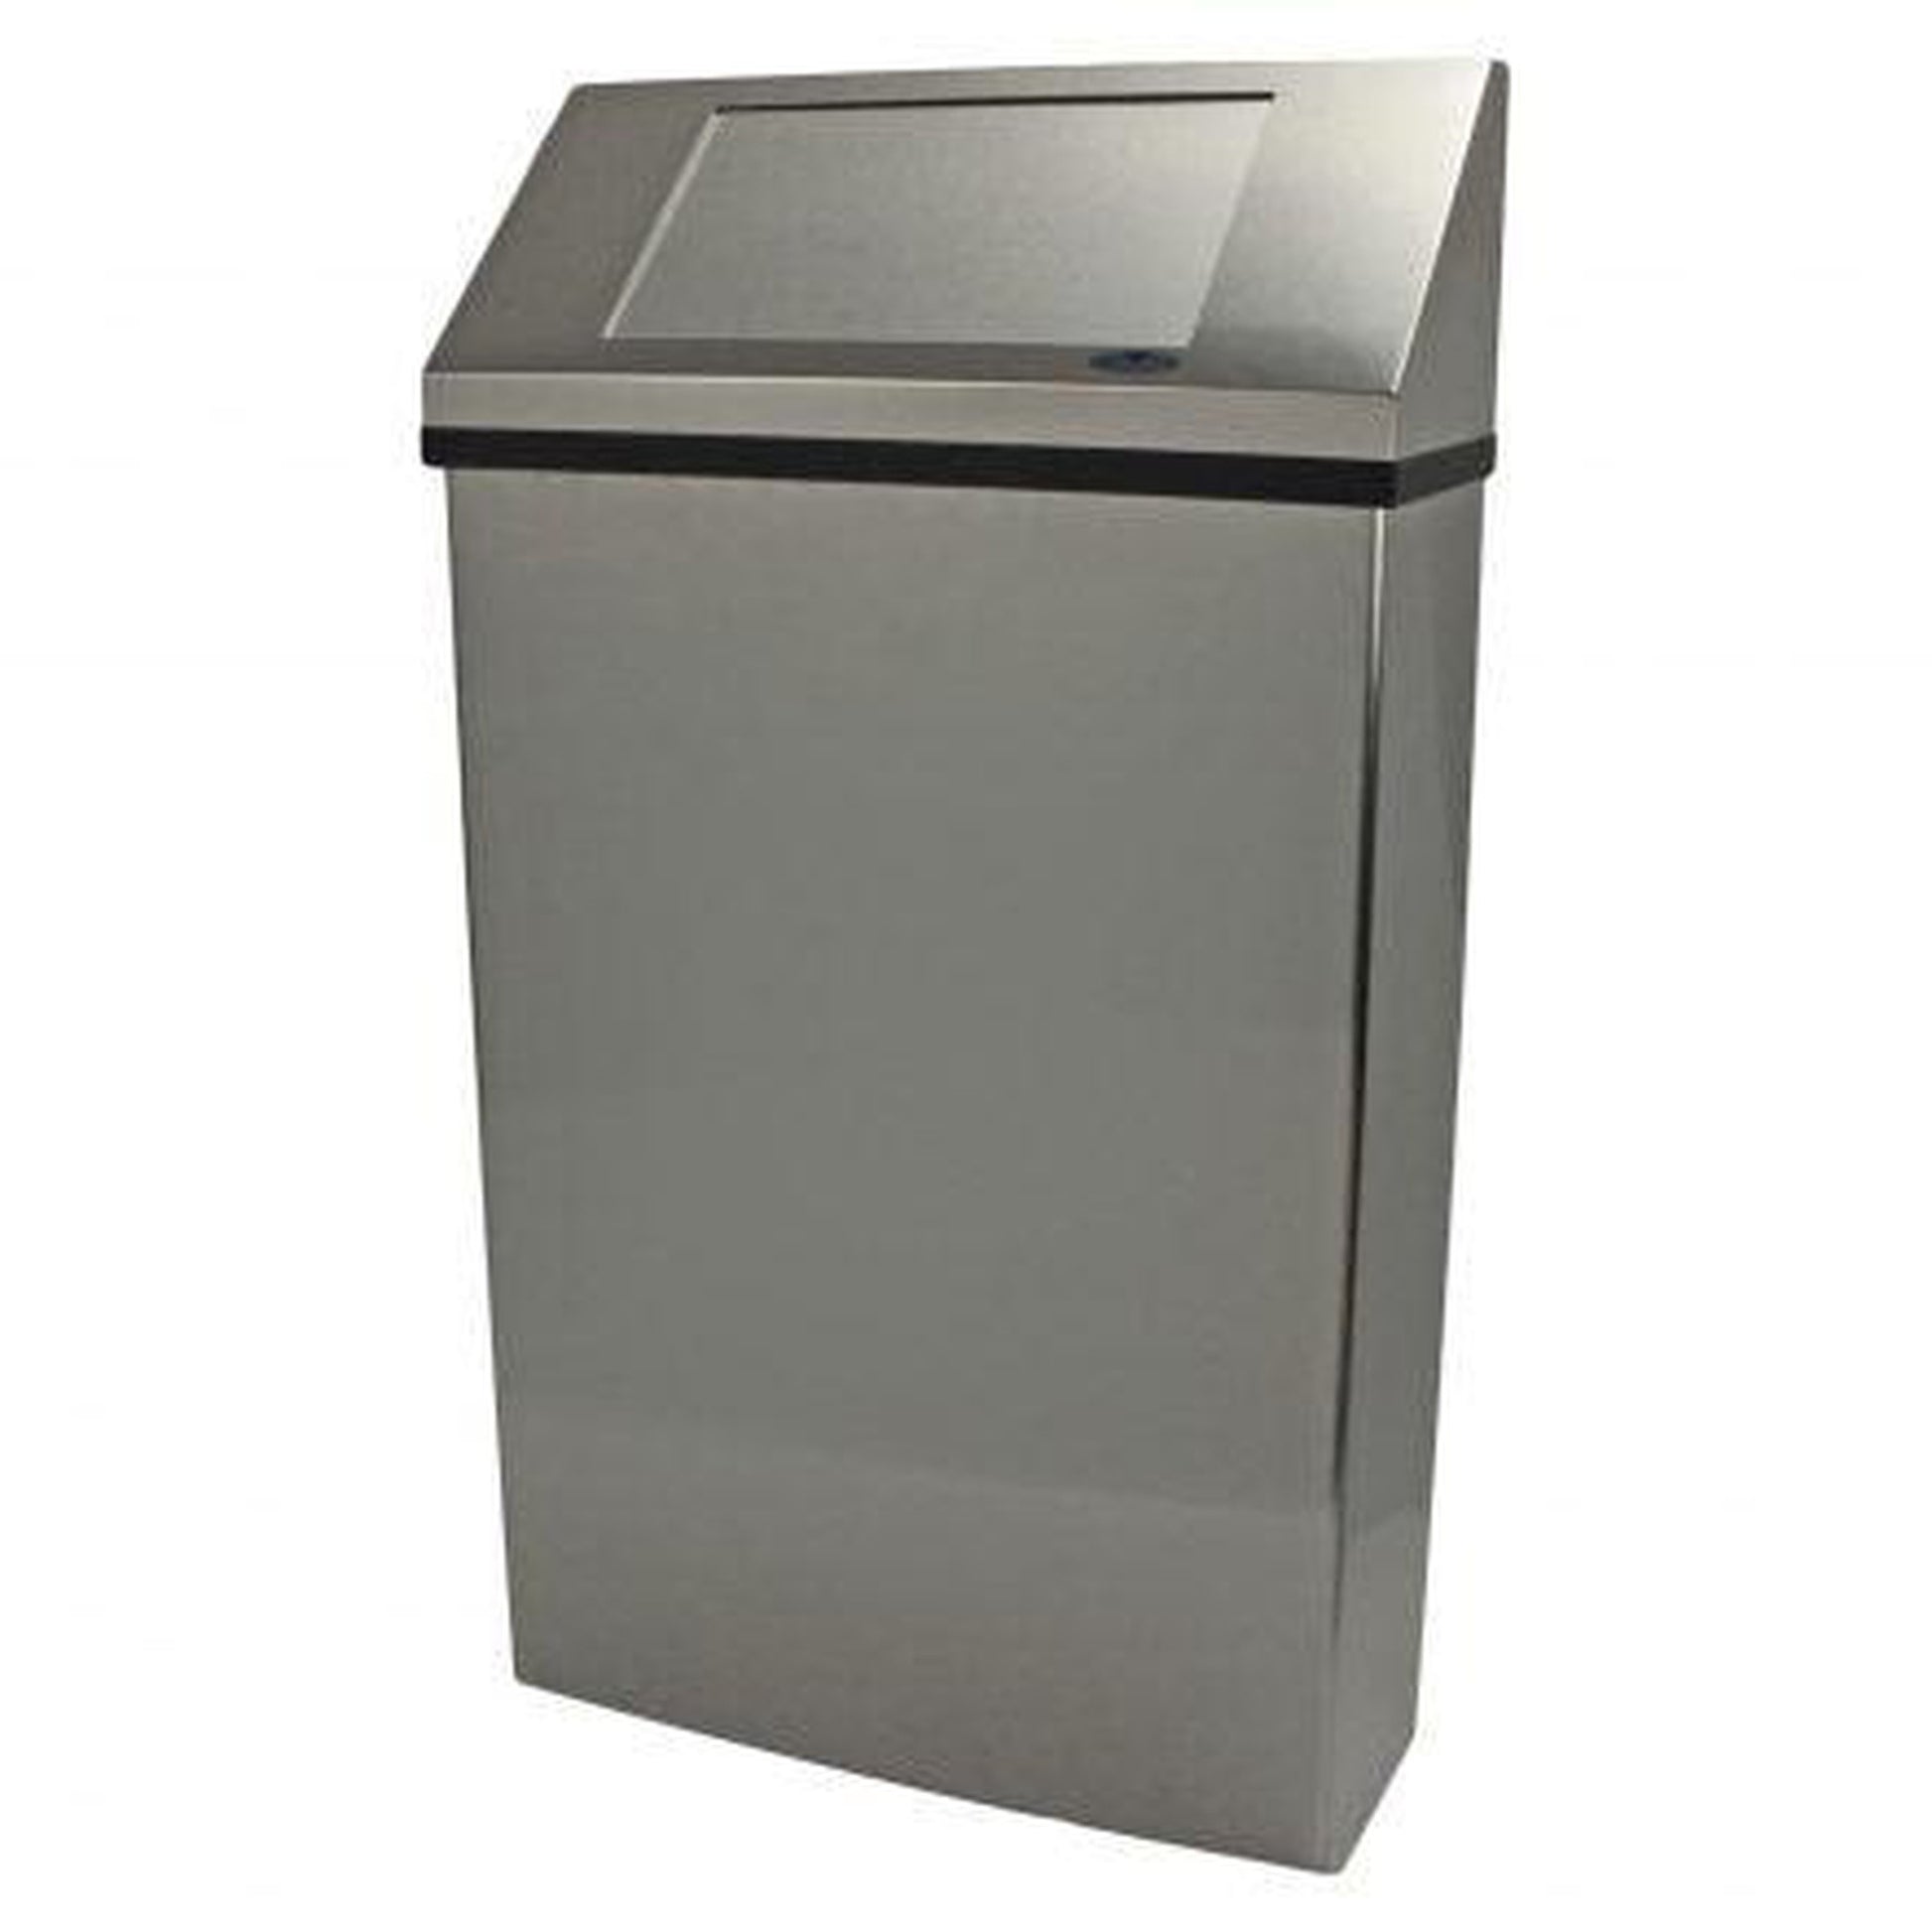 Frost 21.7 x 8 x 38.6 Stainless Steel Satin Waste Receptacles